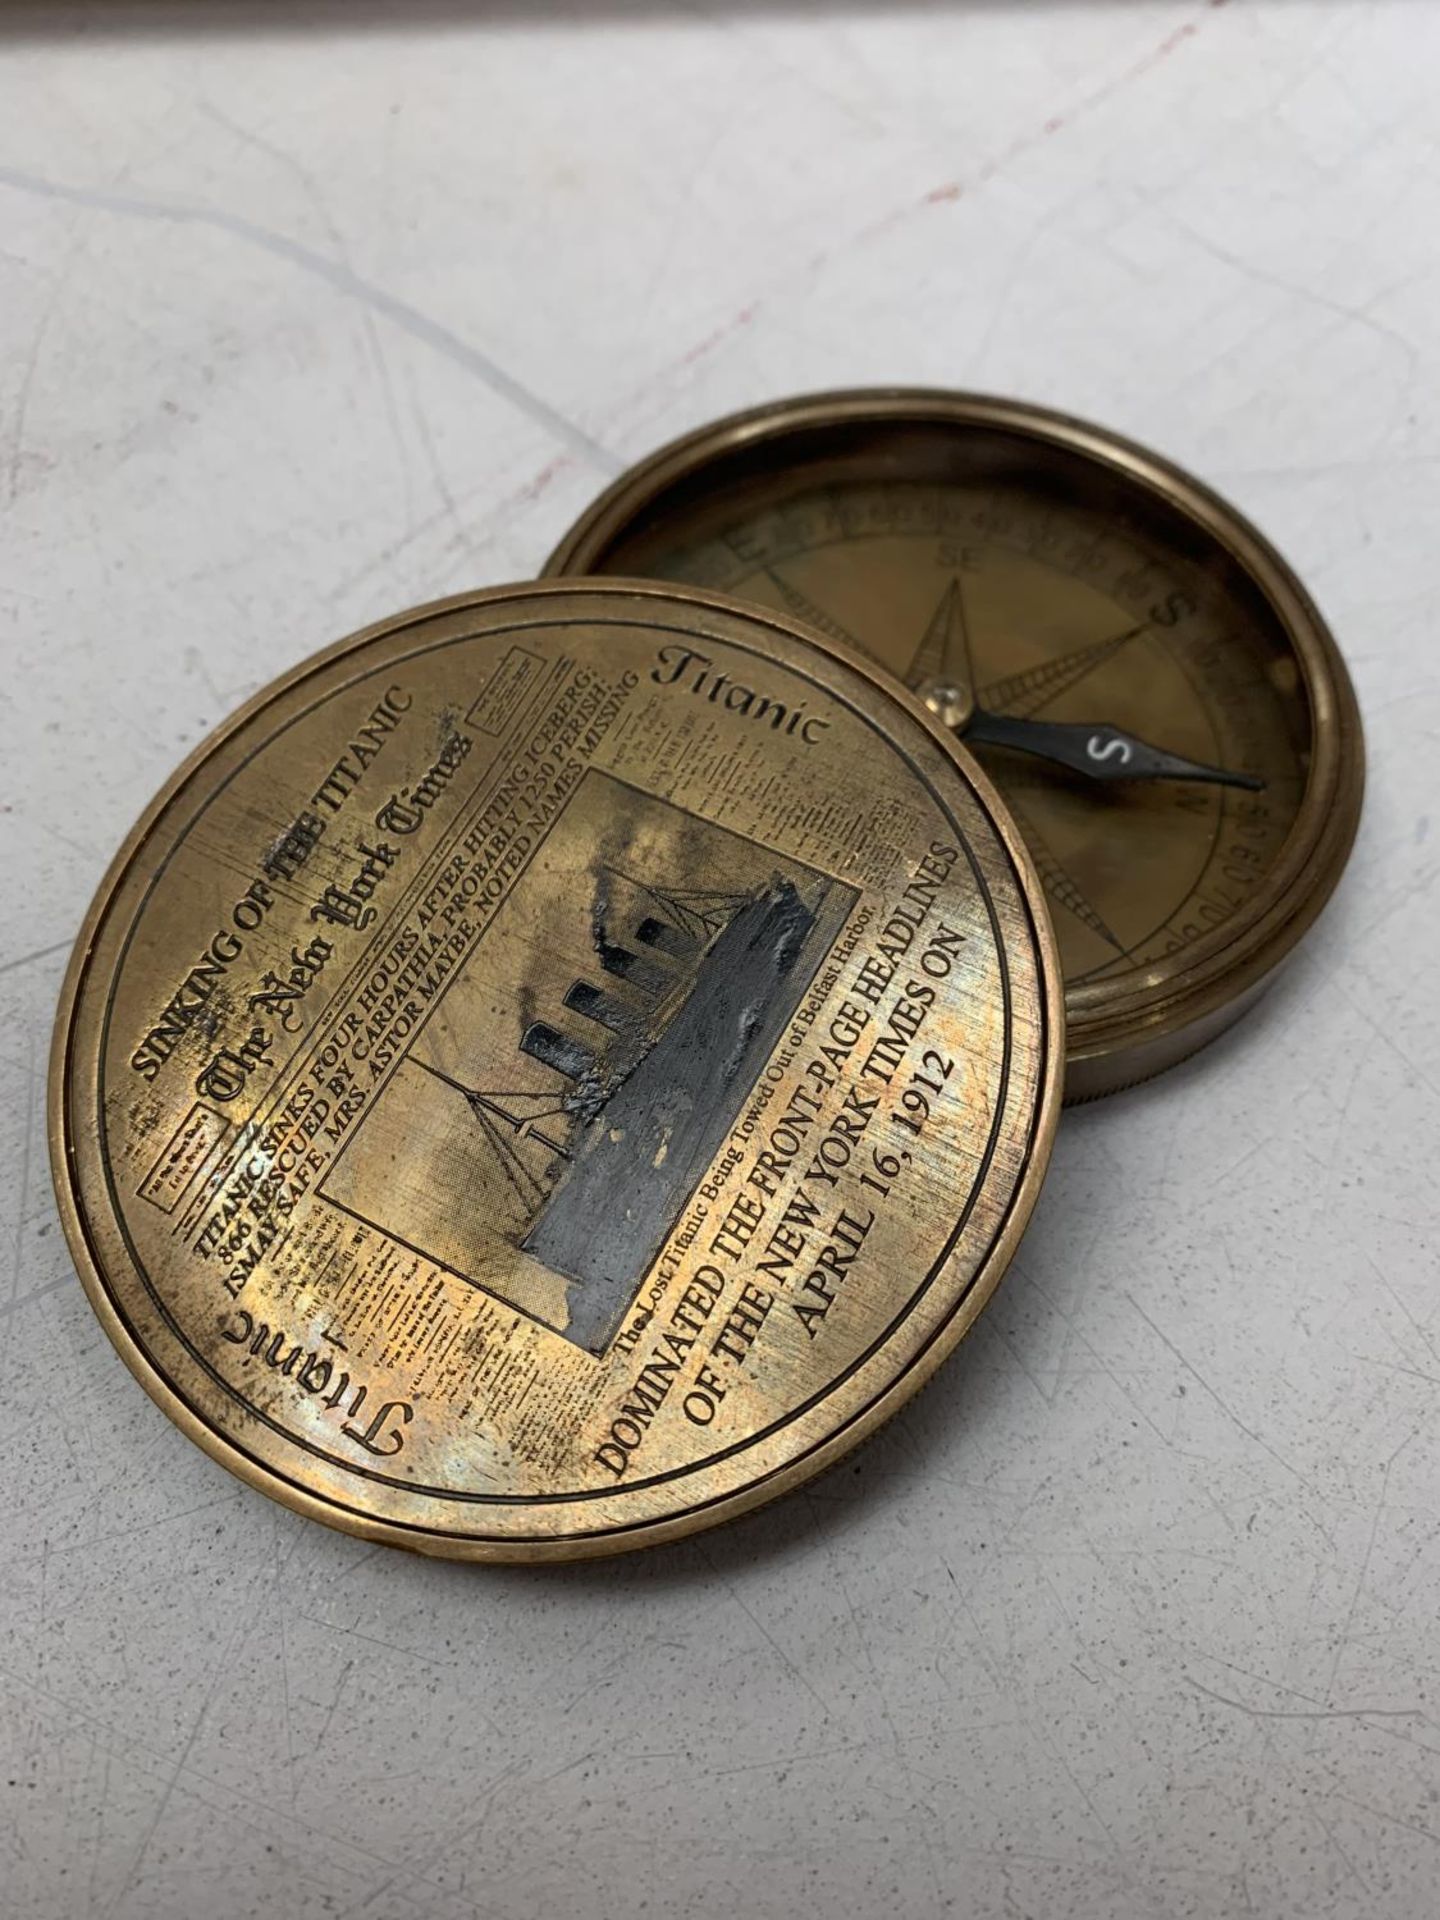 A BRASS COMPASS WITH ENGRAVING RELATING TO THE TITANIC - Image 2 of 4